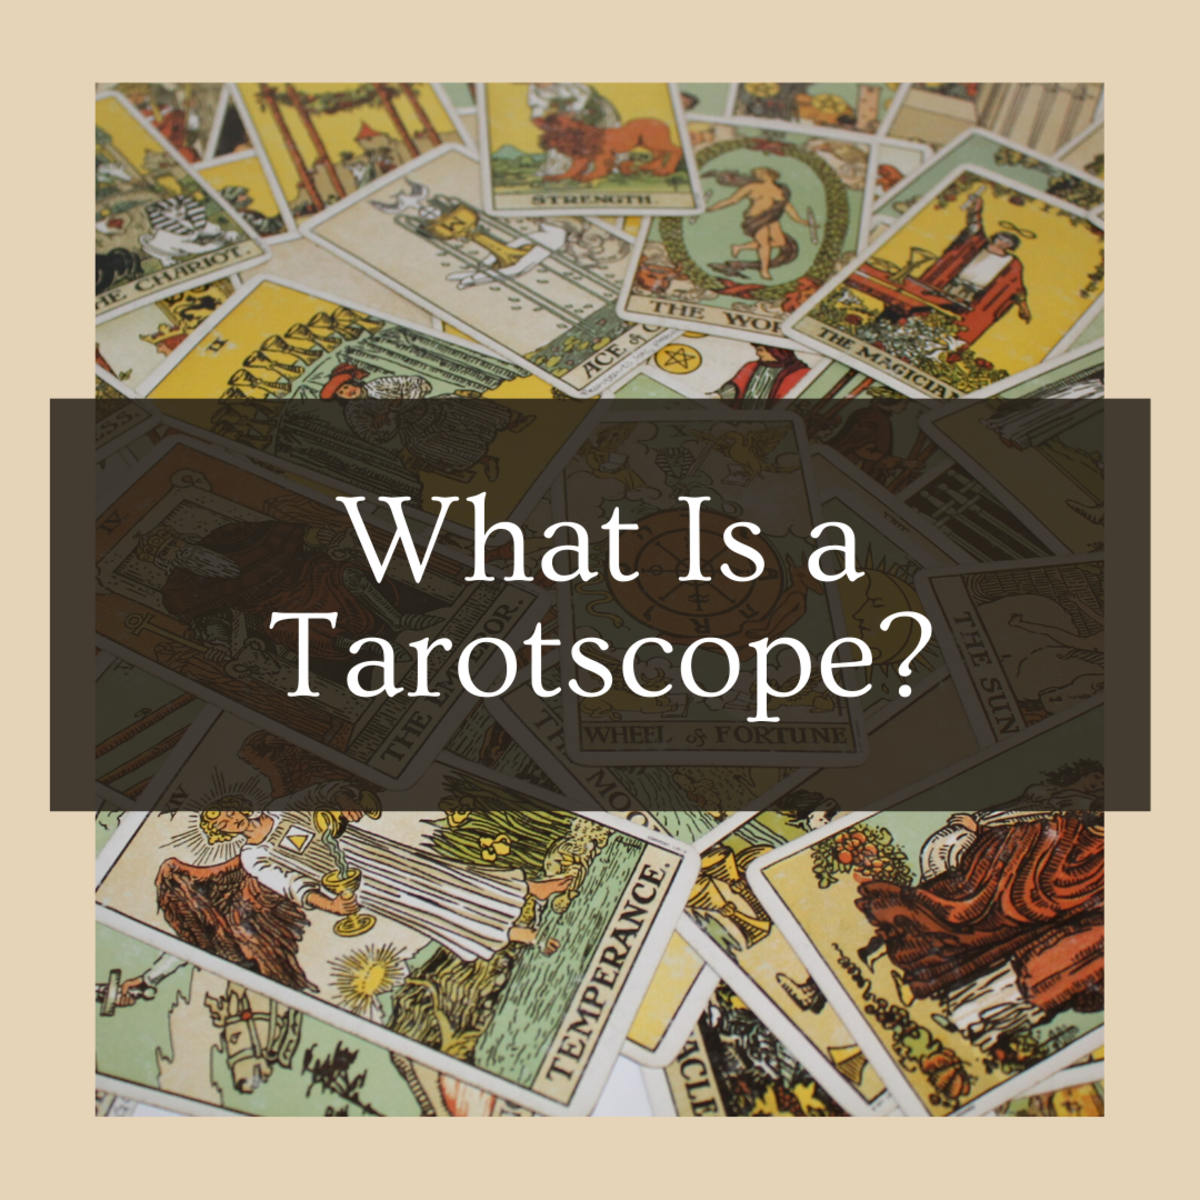 What Is a Tarotscope?